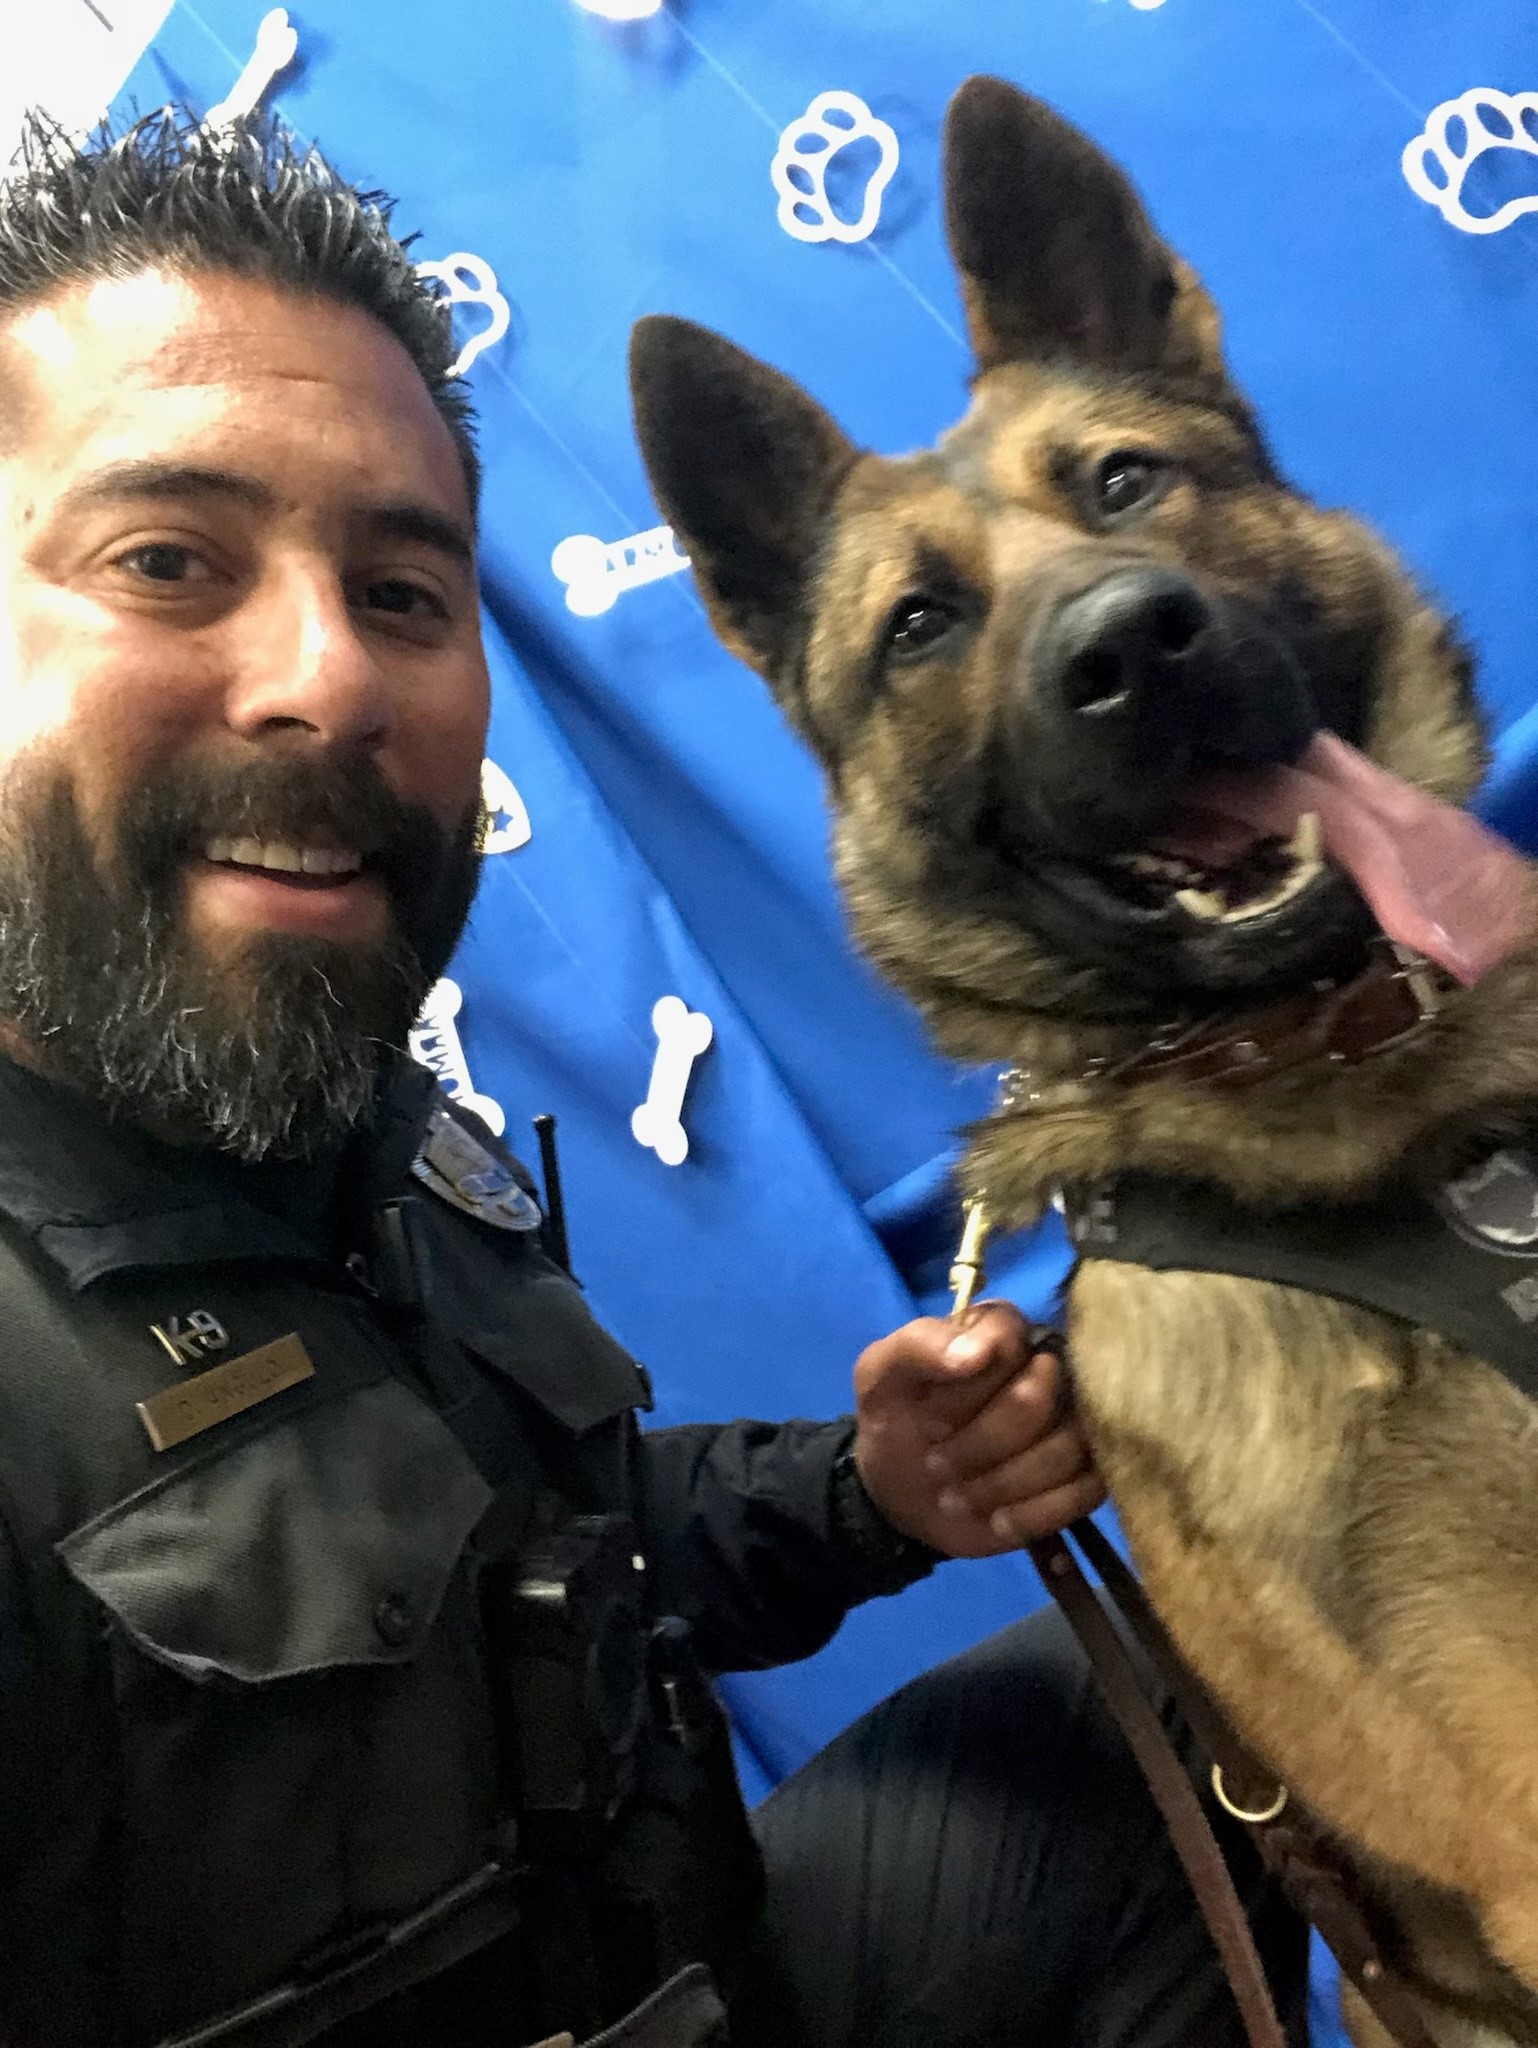 Officer with dog